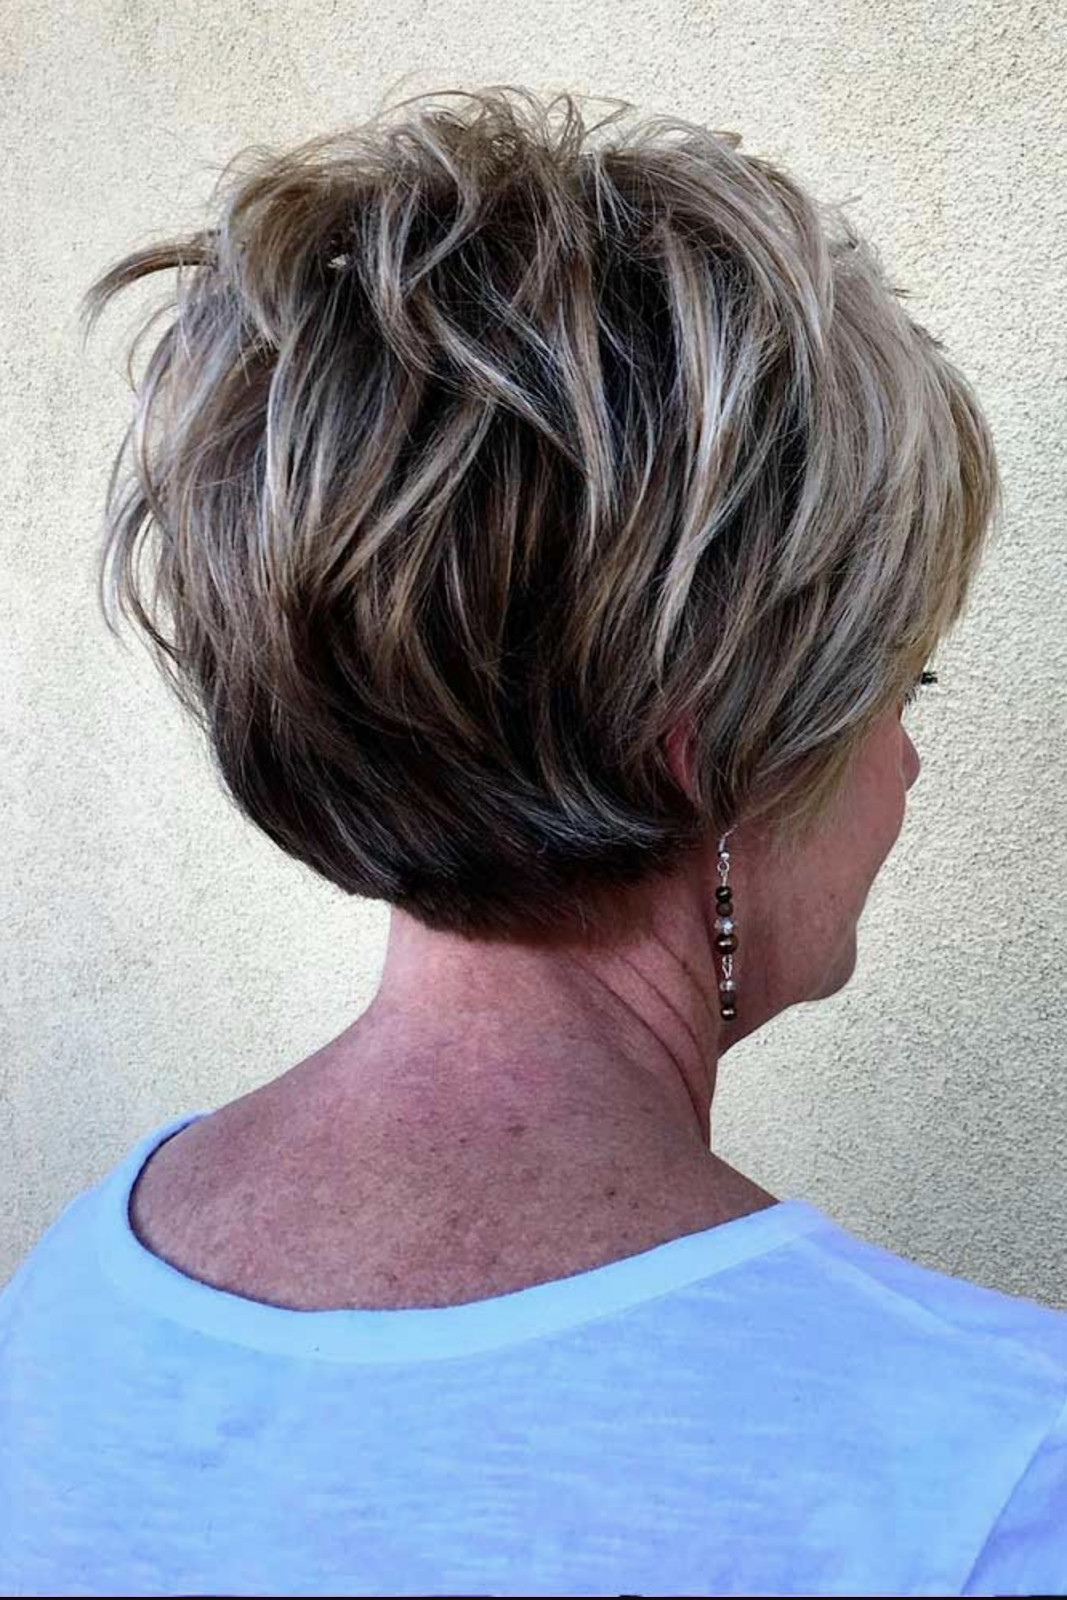 Haircuts For Older Women 2020
 2019 2020 Short Hairstyles for Women Over 50 That Are